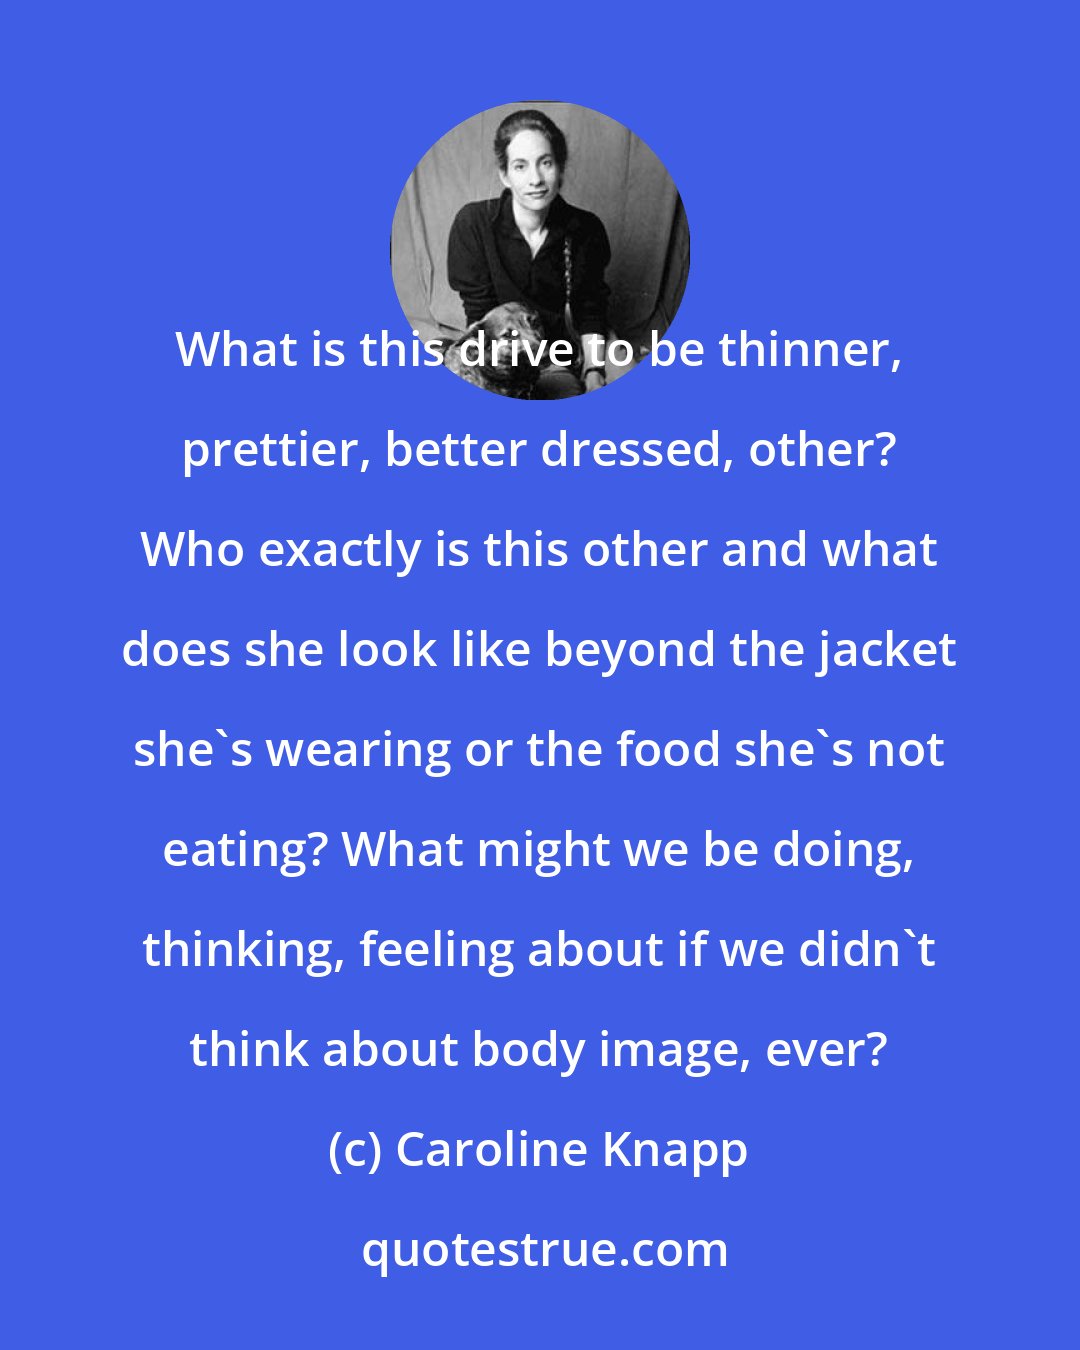 Caroline Knapp: What is this drive to be thinner, prettier, better dressed, other? Who exactly is this other and what does she look like beyond the jacket she's wearing or the food she's not eating? What might we be doing, thinking, feeling about if we didn't think about body image, ever?